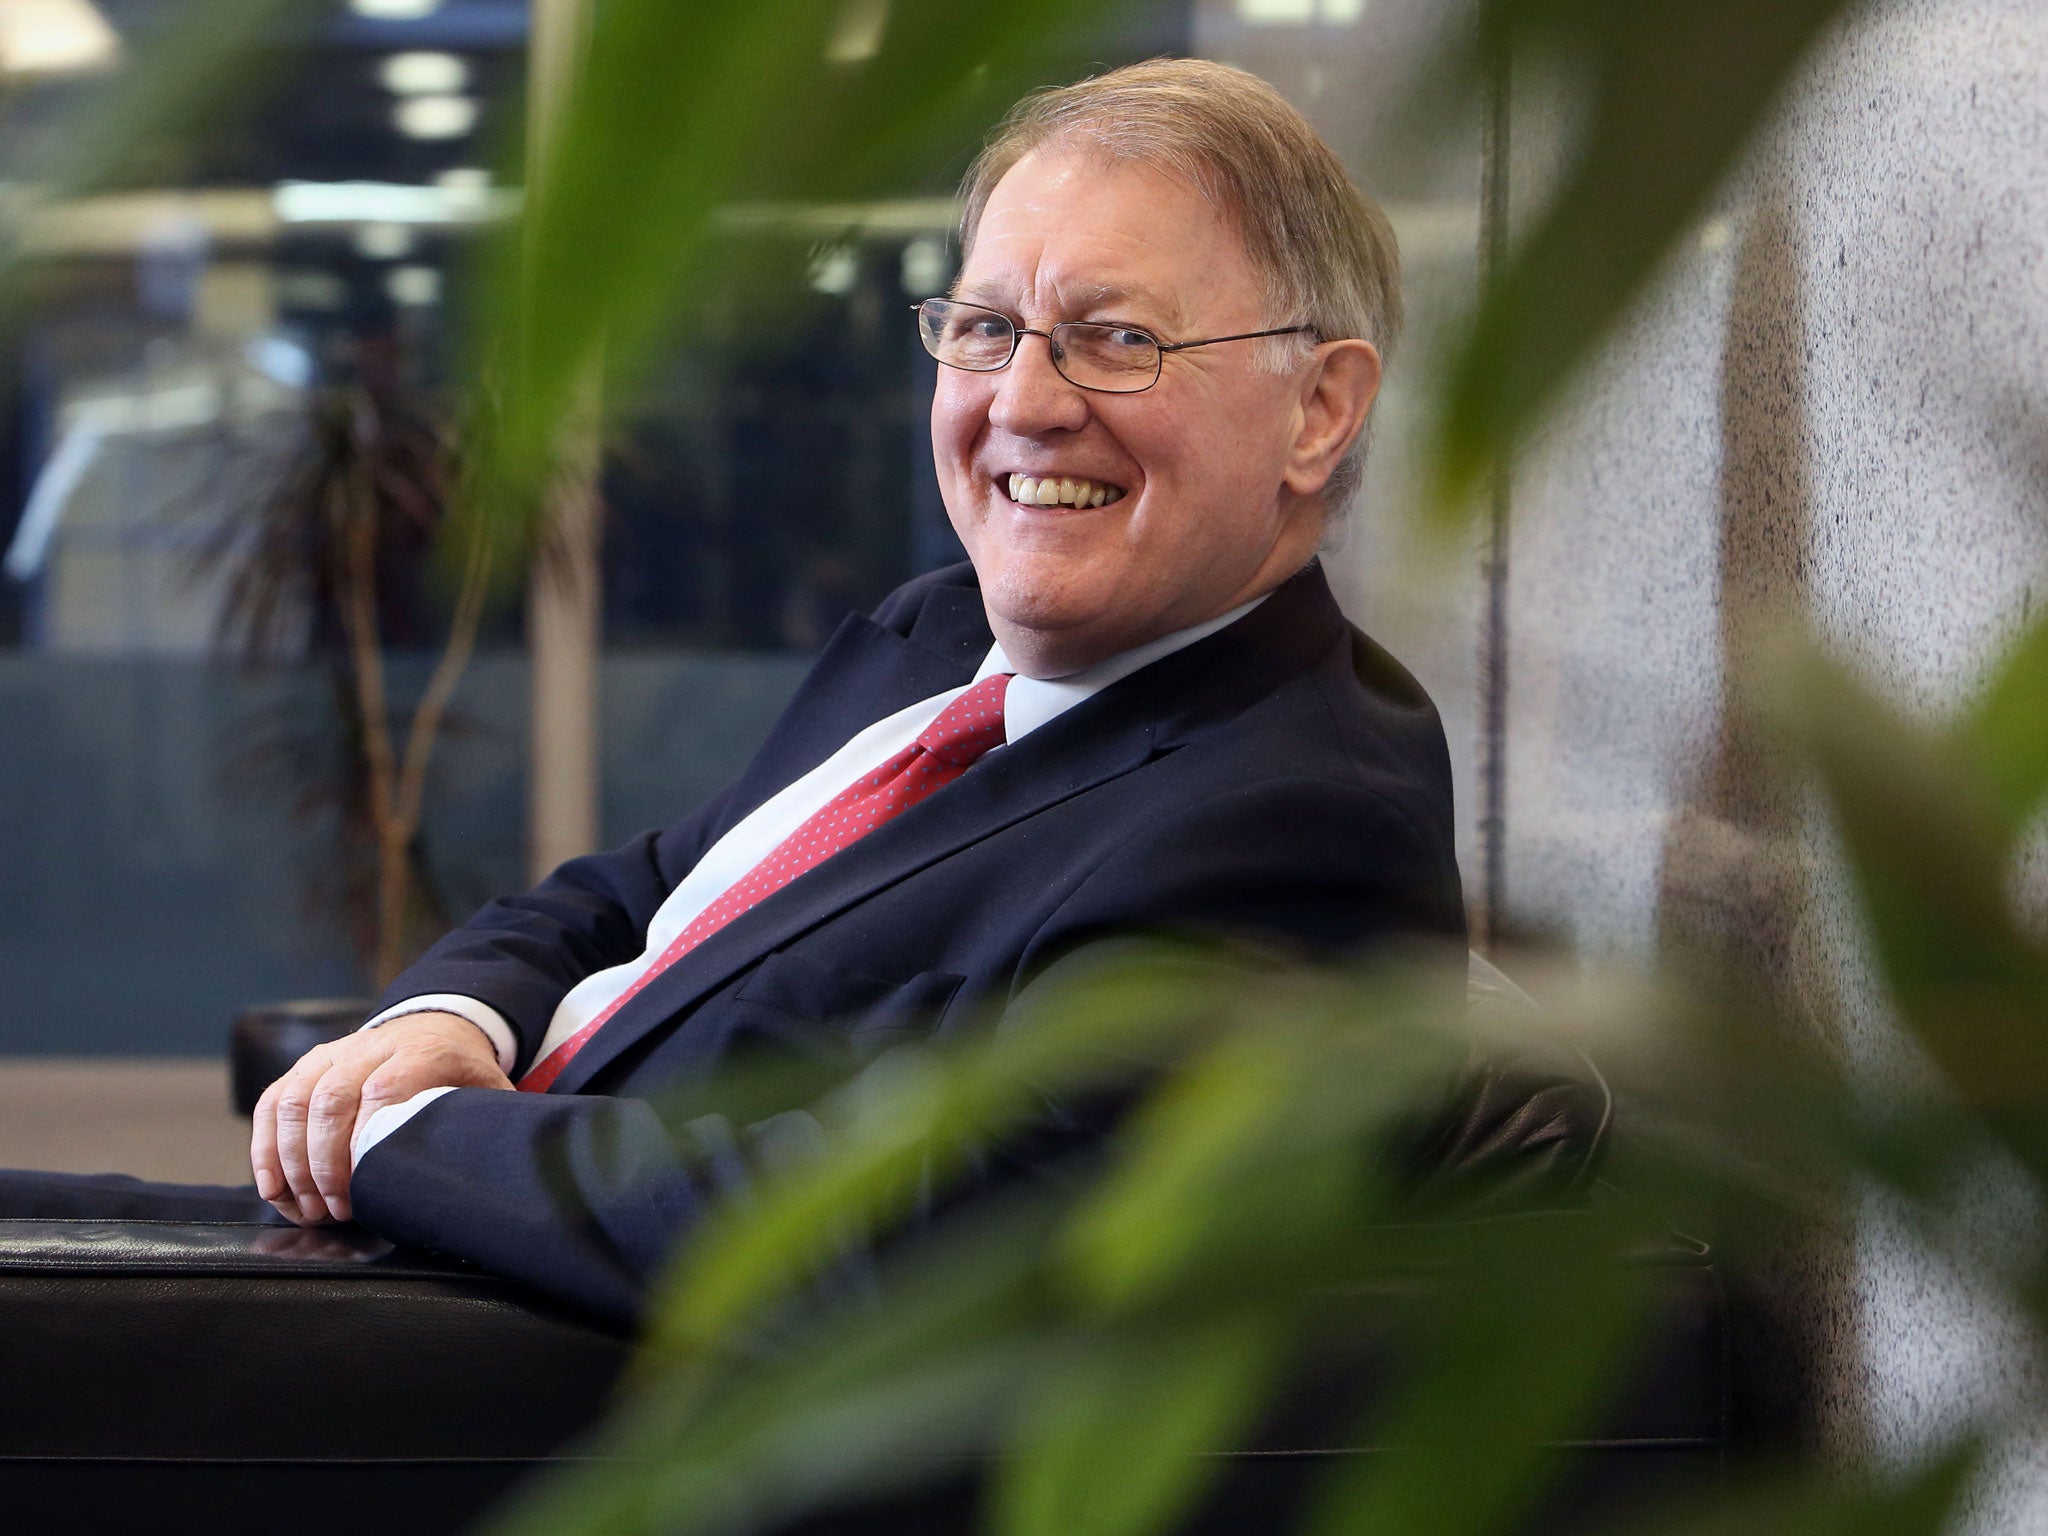 Sir Mike Richards is one of the most respected figures in the health sector